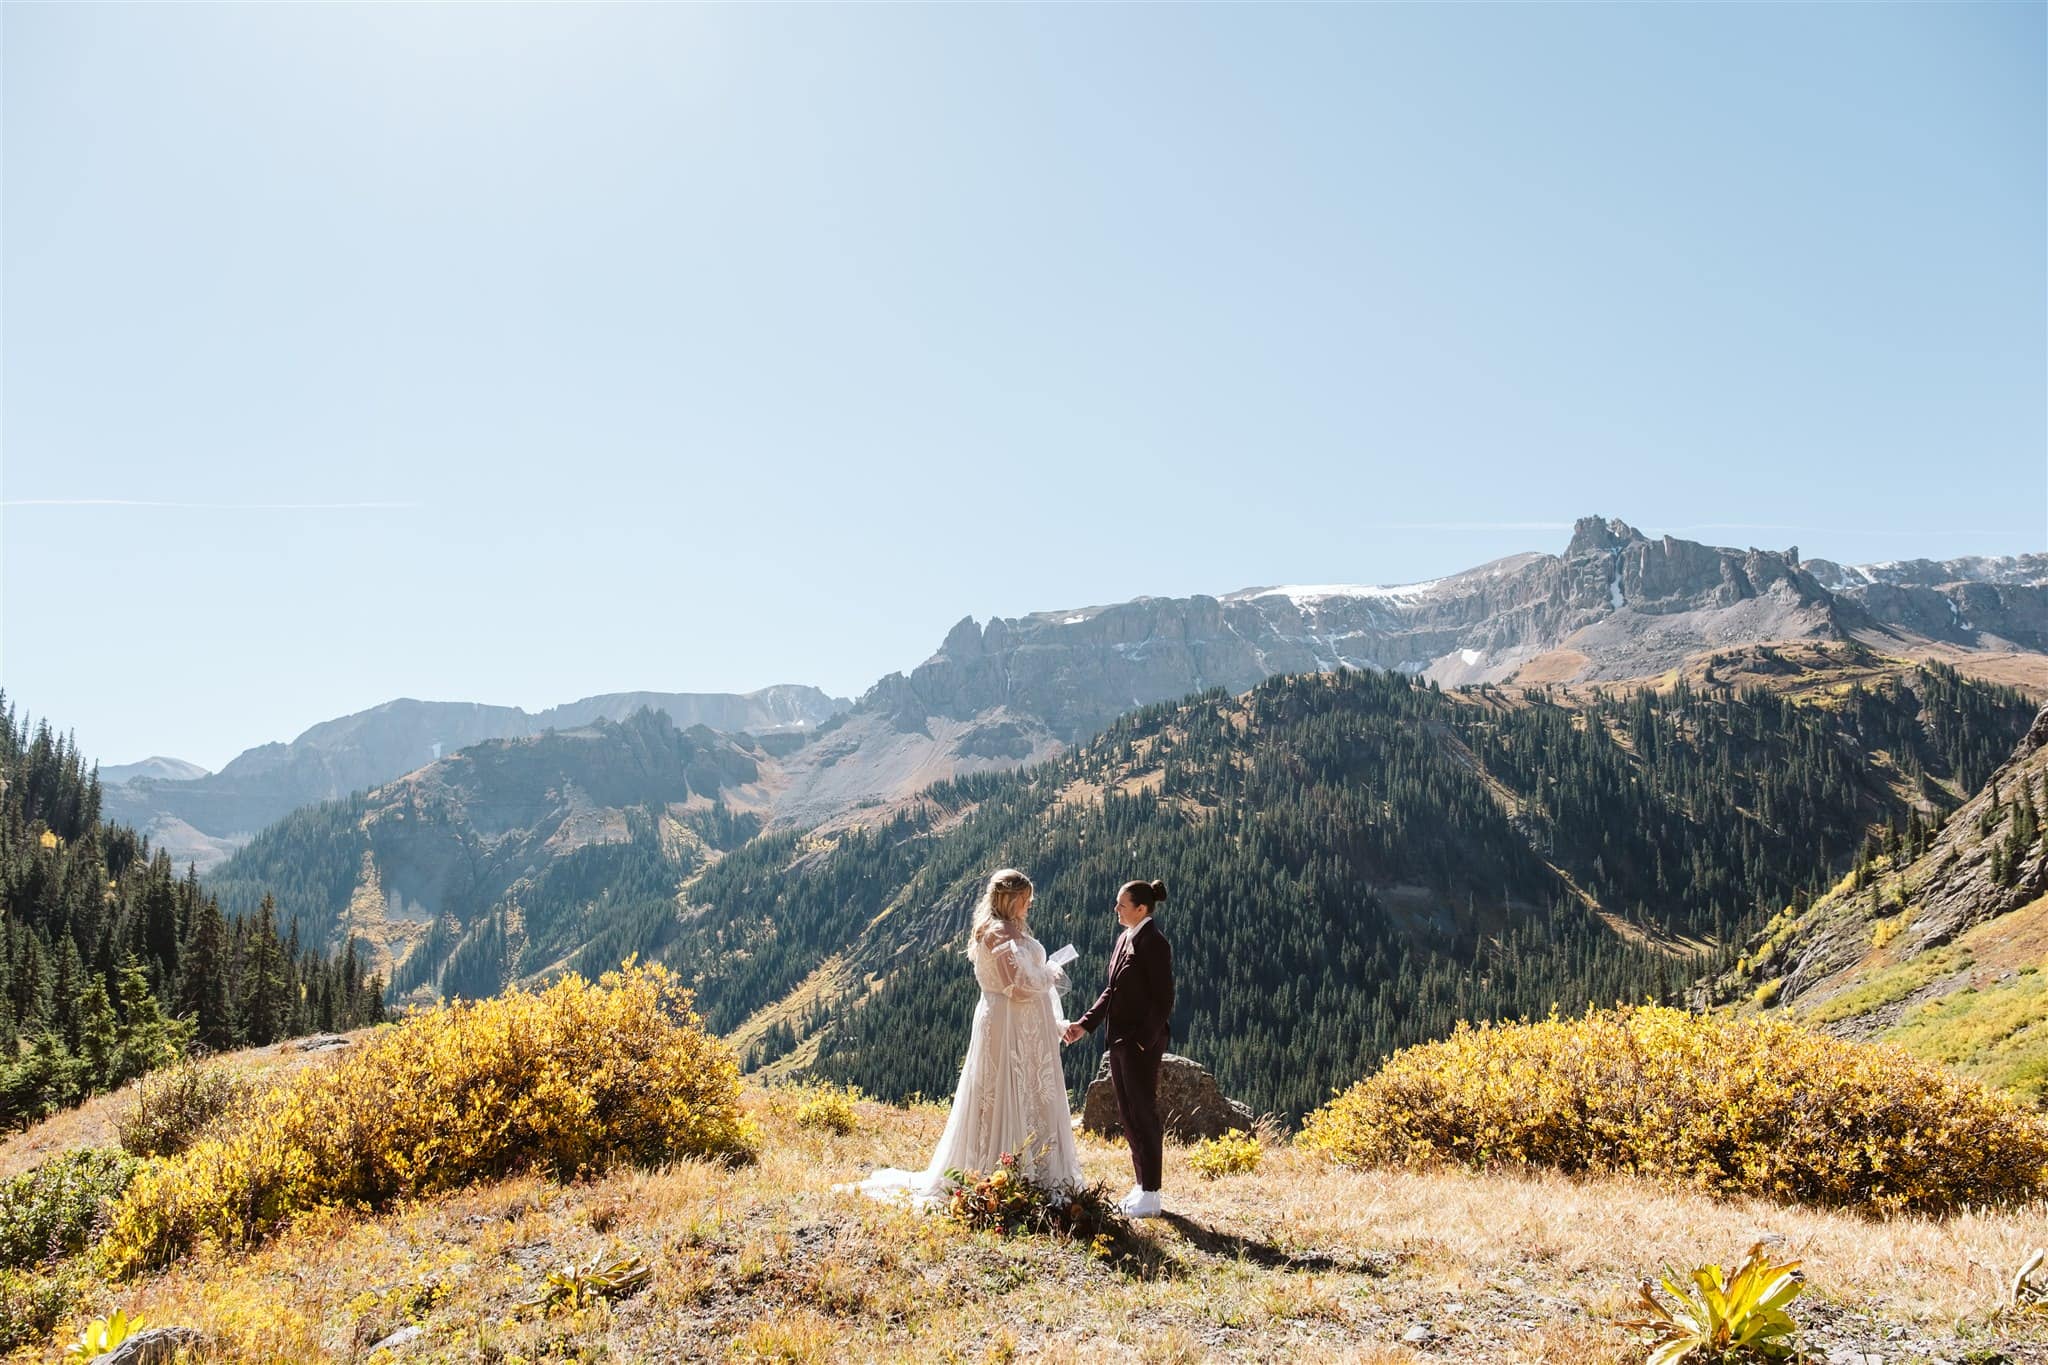 LGBTQ+ micro-wedding in Ouray, CO